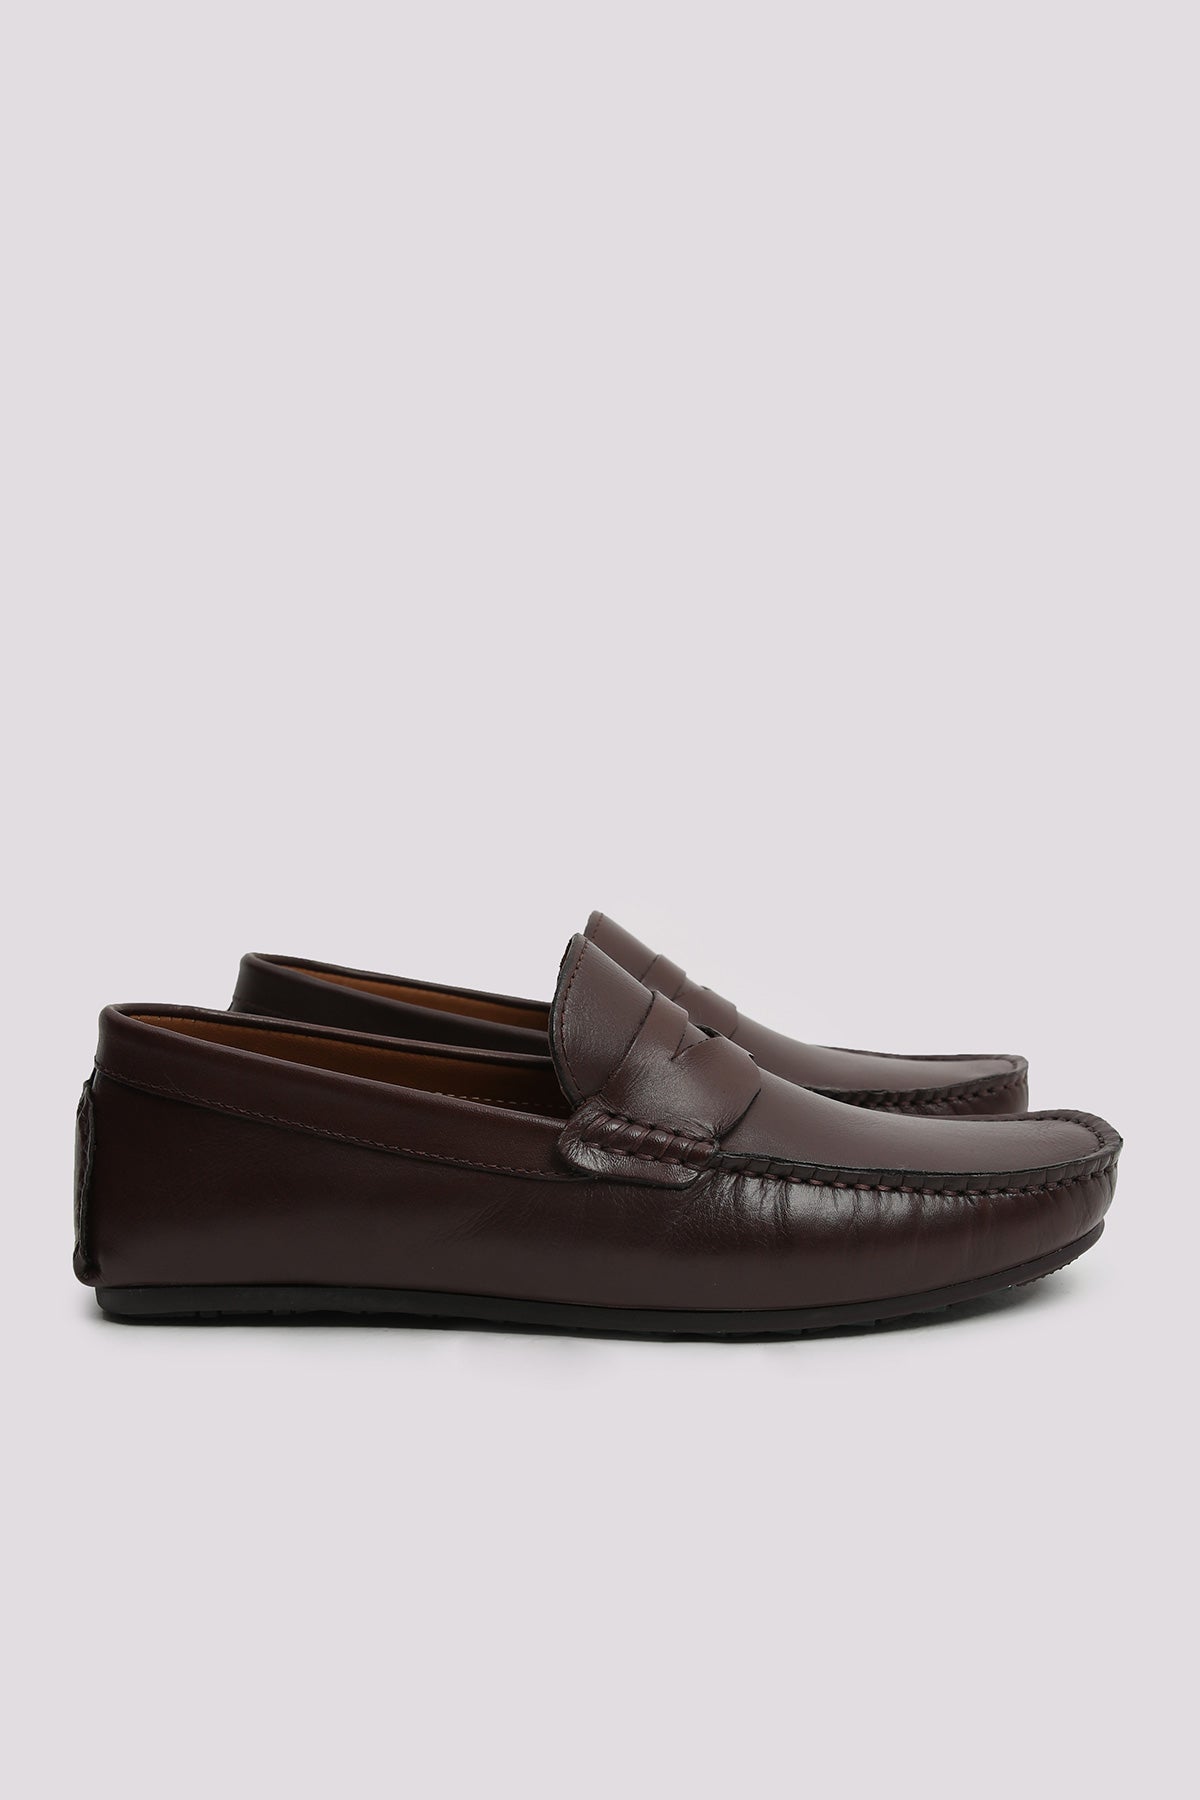 BROWN LEATHER MOCCASIN SHOES